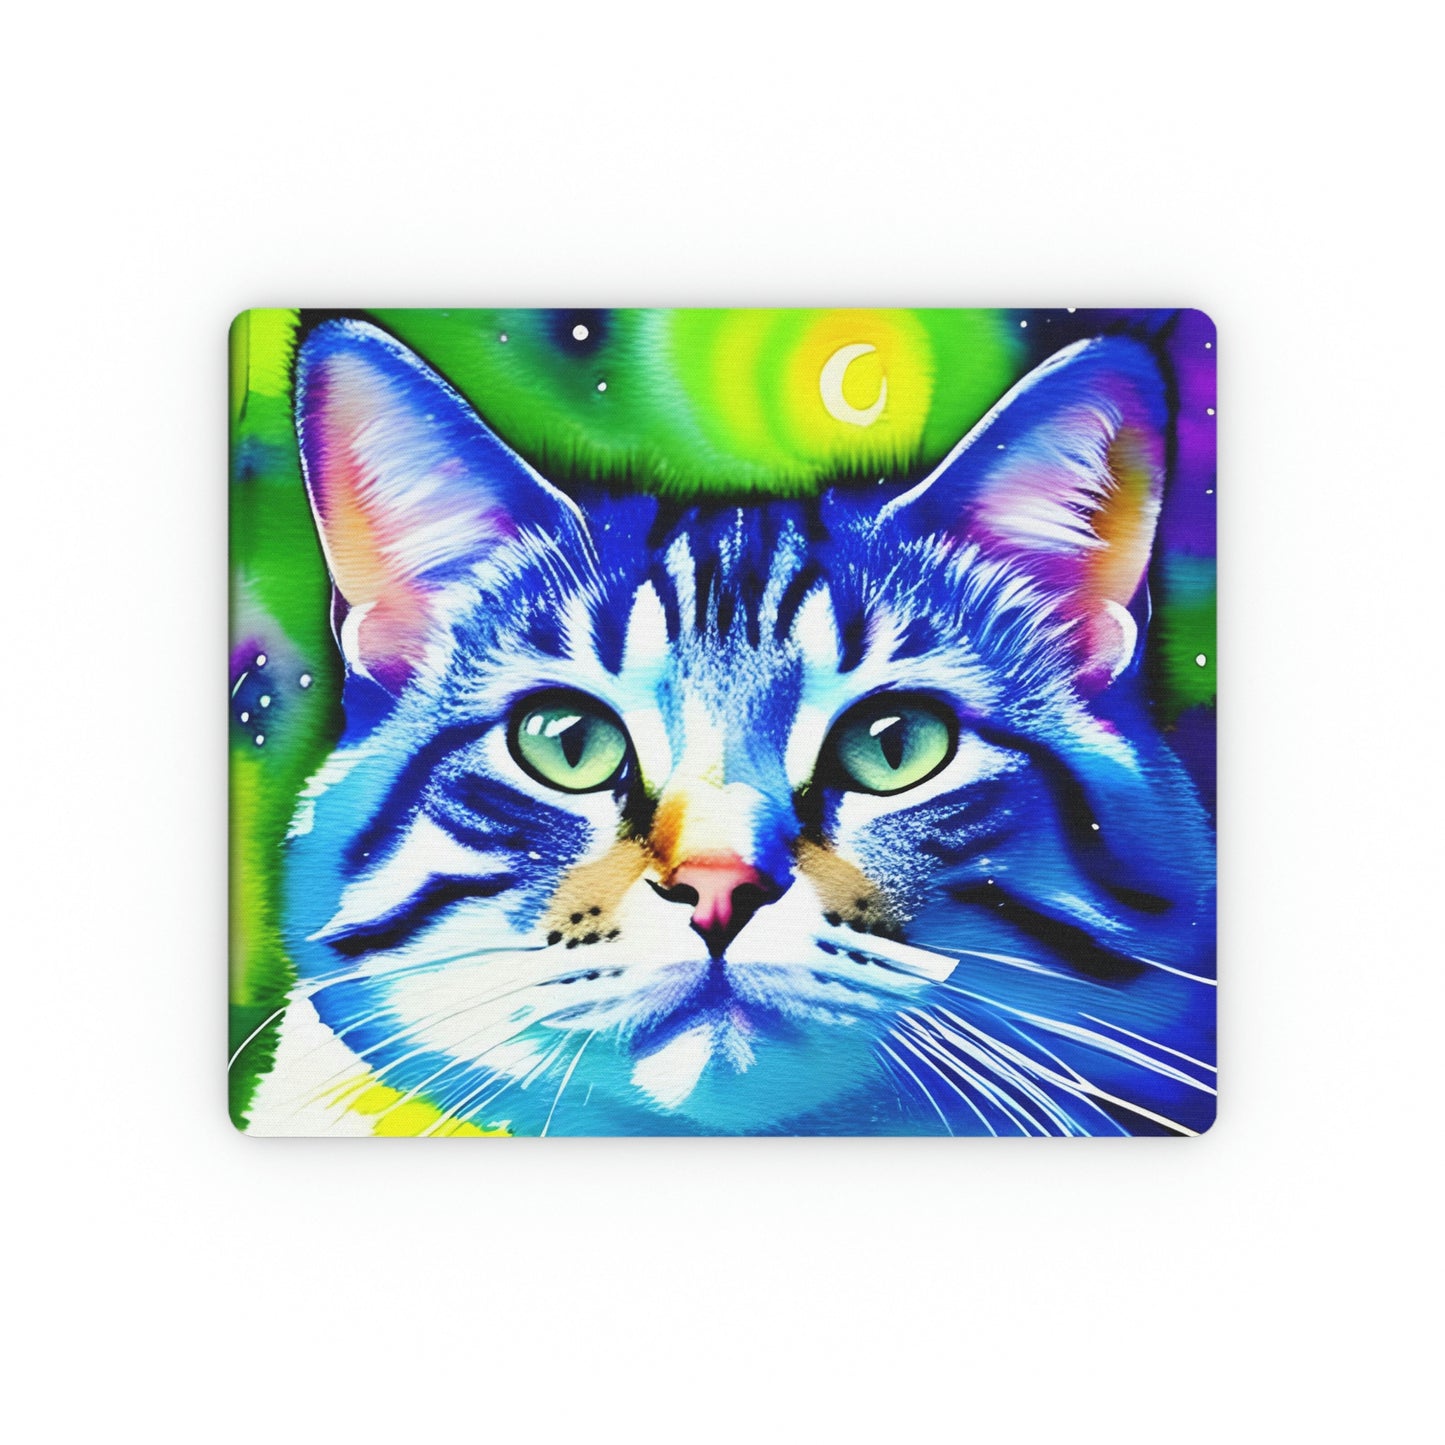 Colorful cat graphic Rectangular Mouse Pad, Cat lover gift, Bright Cute cat mouse pad, Vibrant Whimsical cat mouse pad, Cat accessories